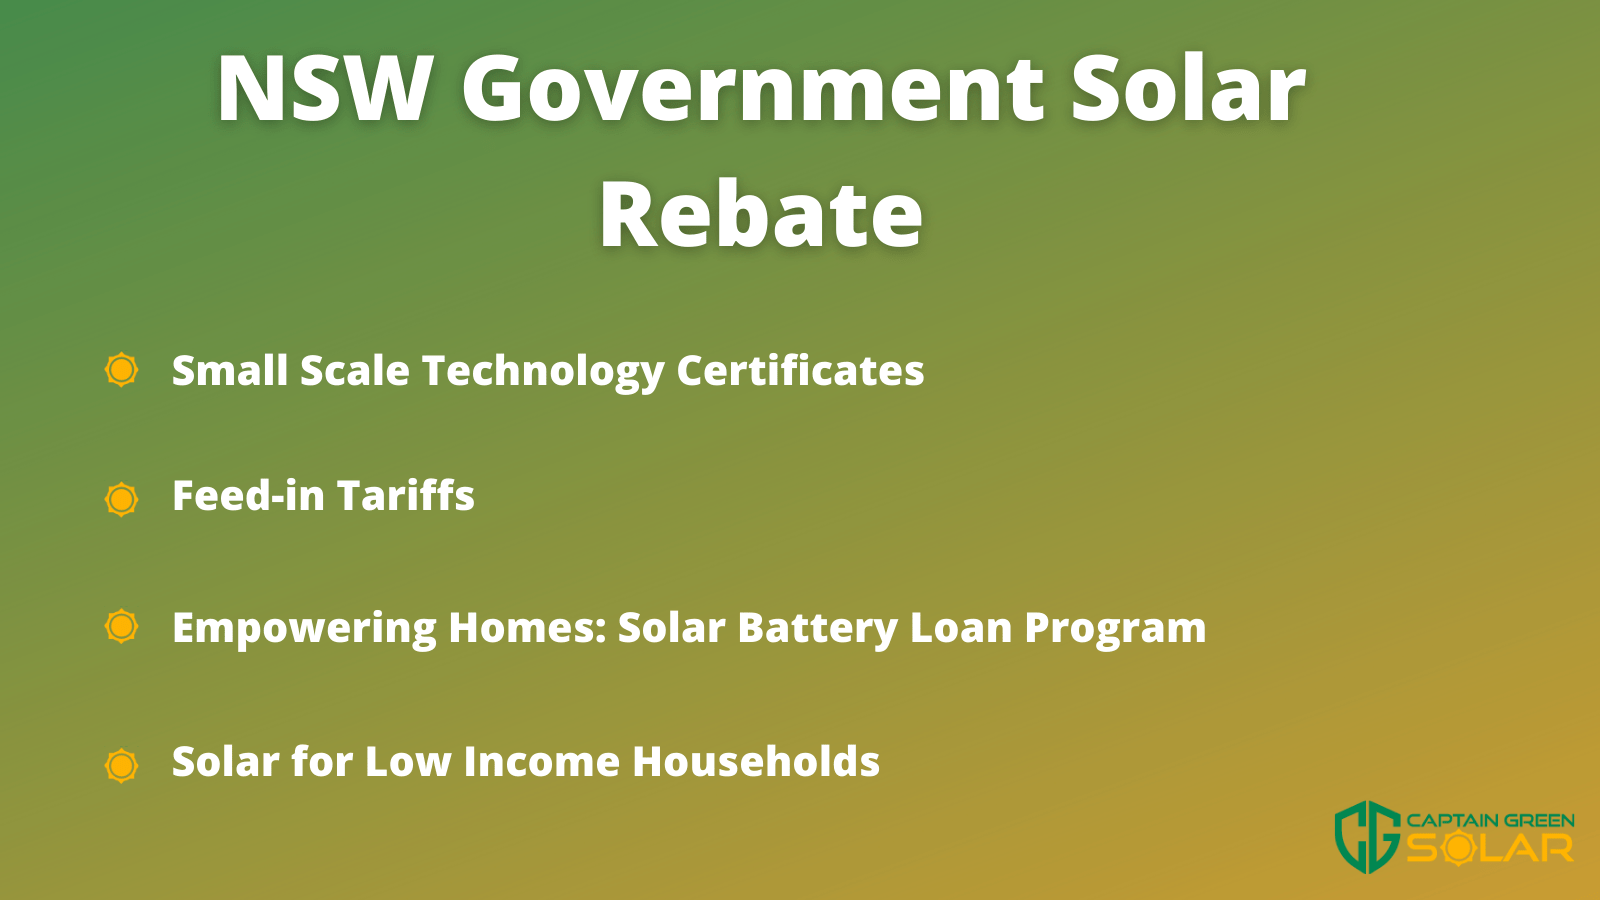 Solar Rebate NSW 2021 Your Guide To The NSW Solar Rebate Scheme